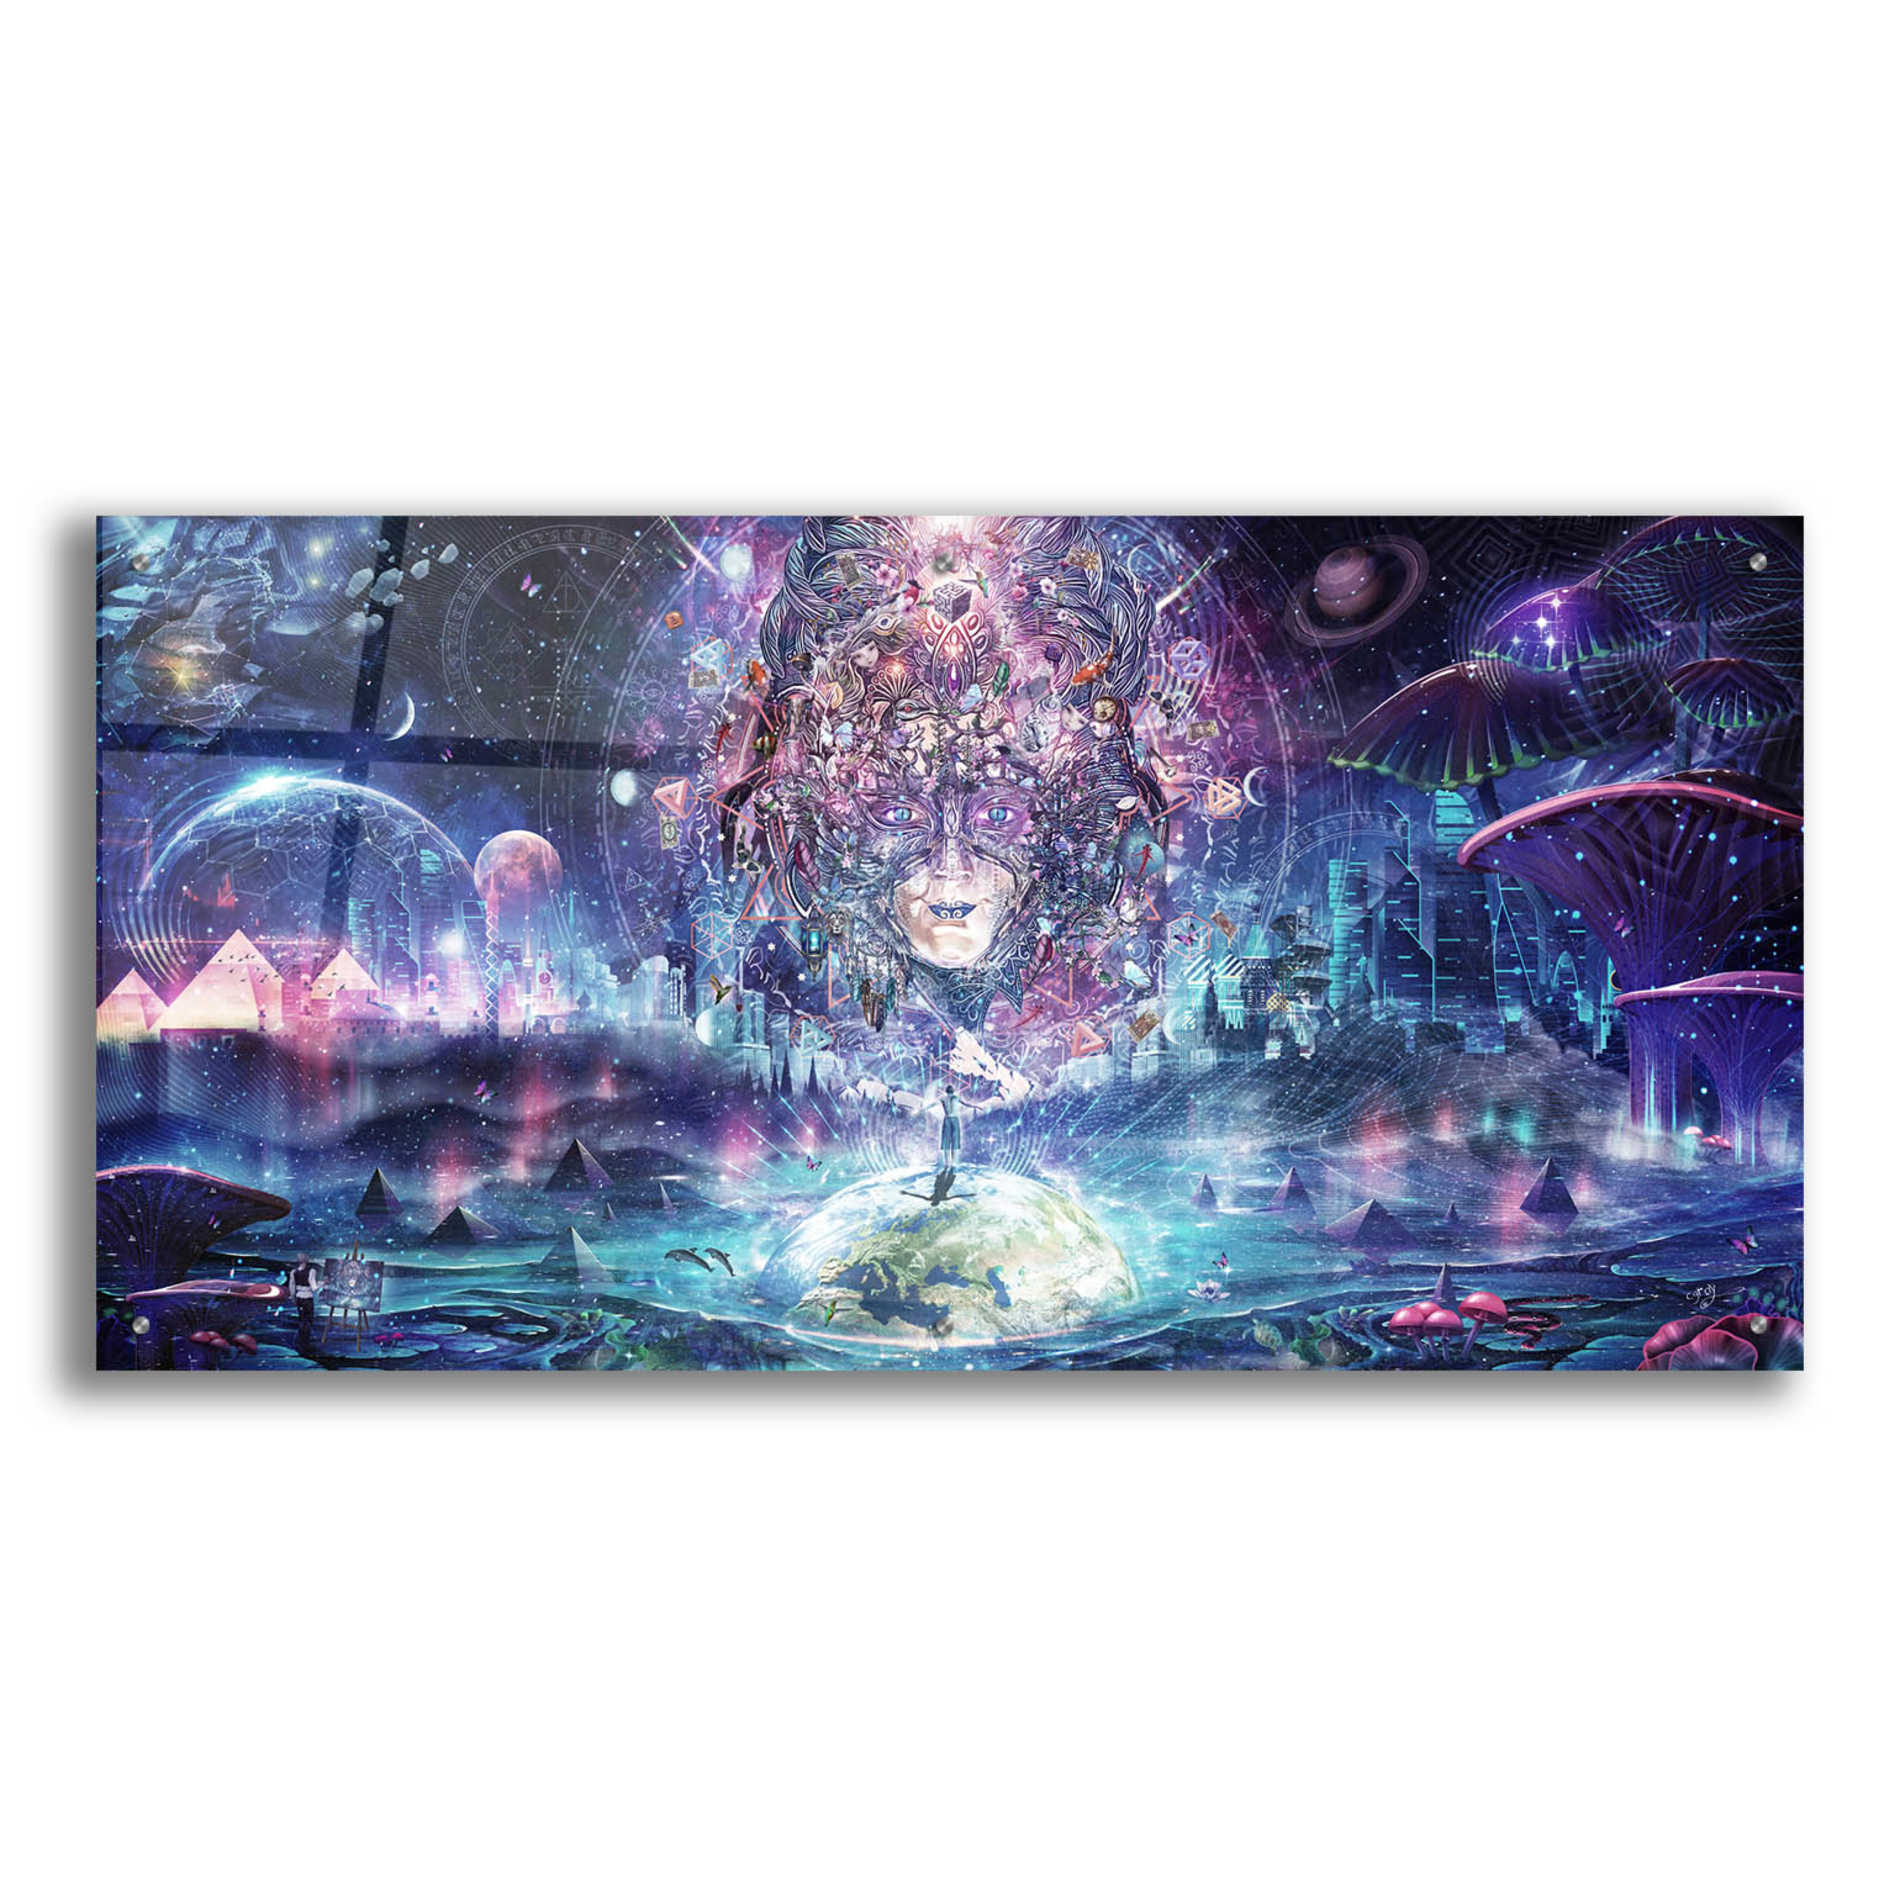 Epic Art 'Quest for the Peak Experience' by Cameron Gray, Acrylic Glass Wall Art,48x24